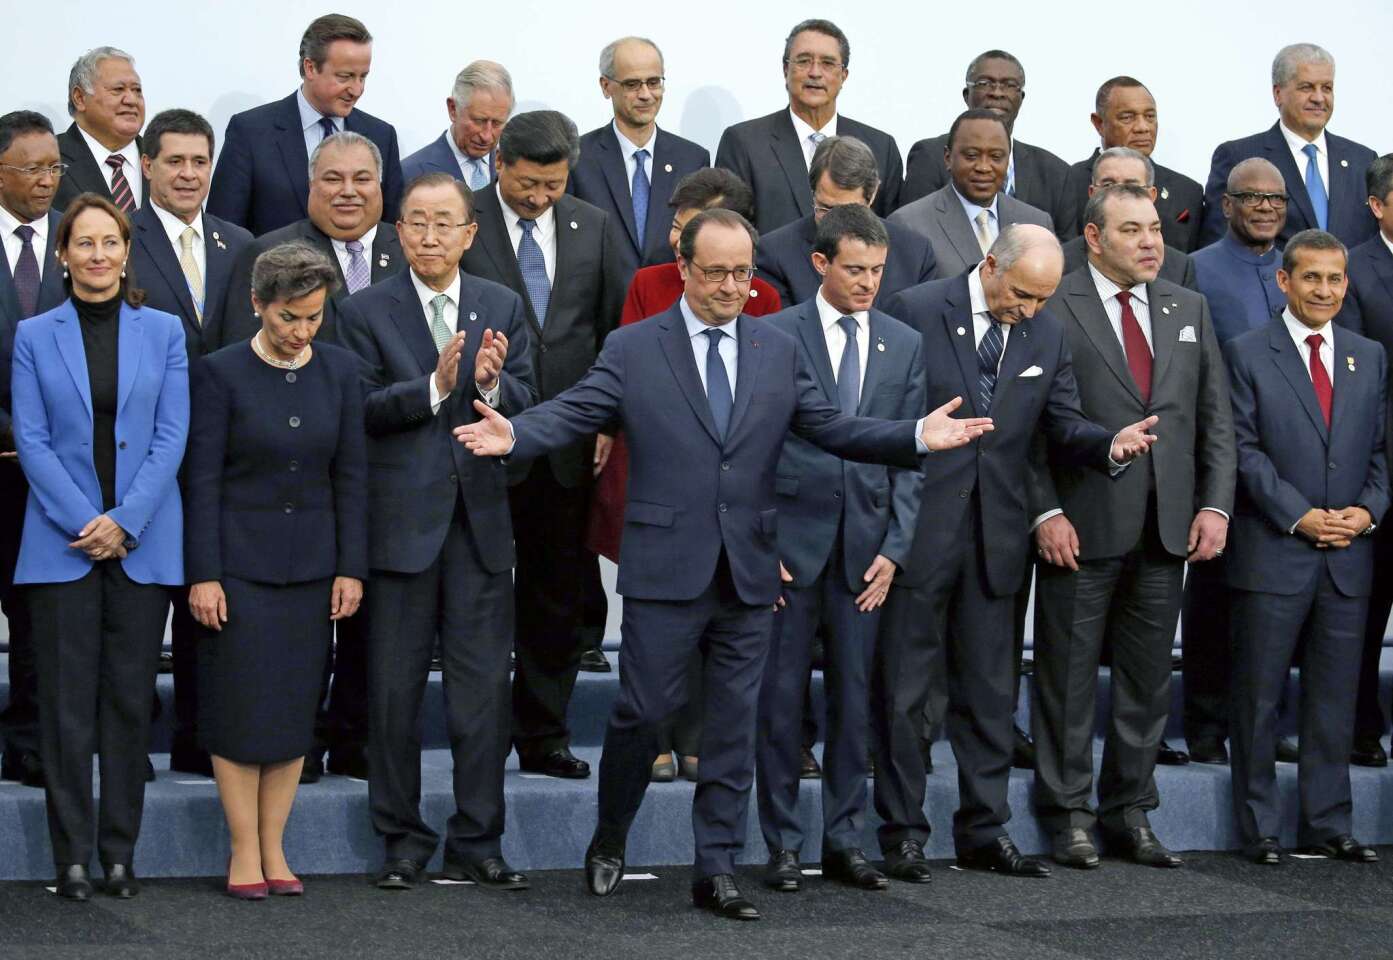 French President Francois Hollande gestures when posing with world leaders for a photo during the opening day of the World Climate Change Conference 2015 near Paris.